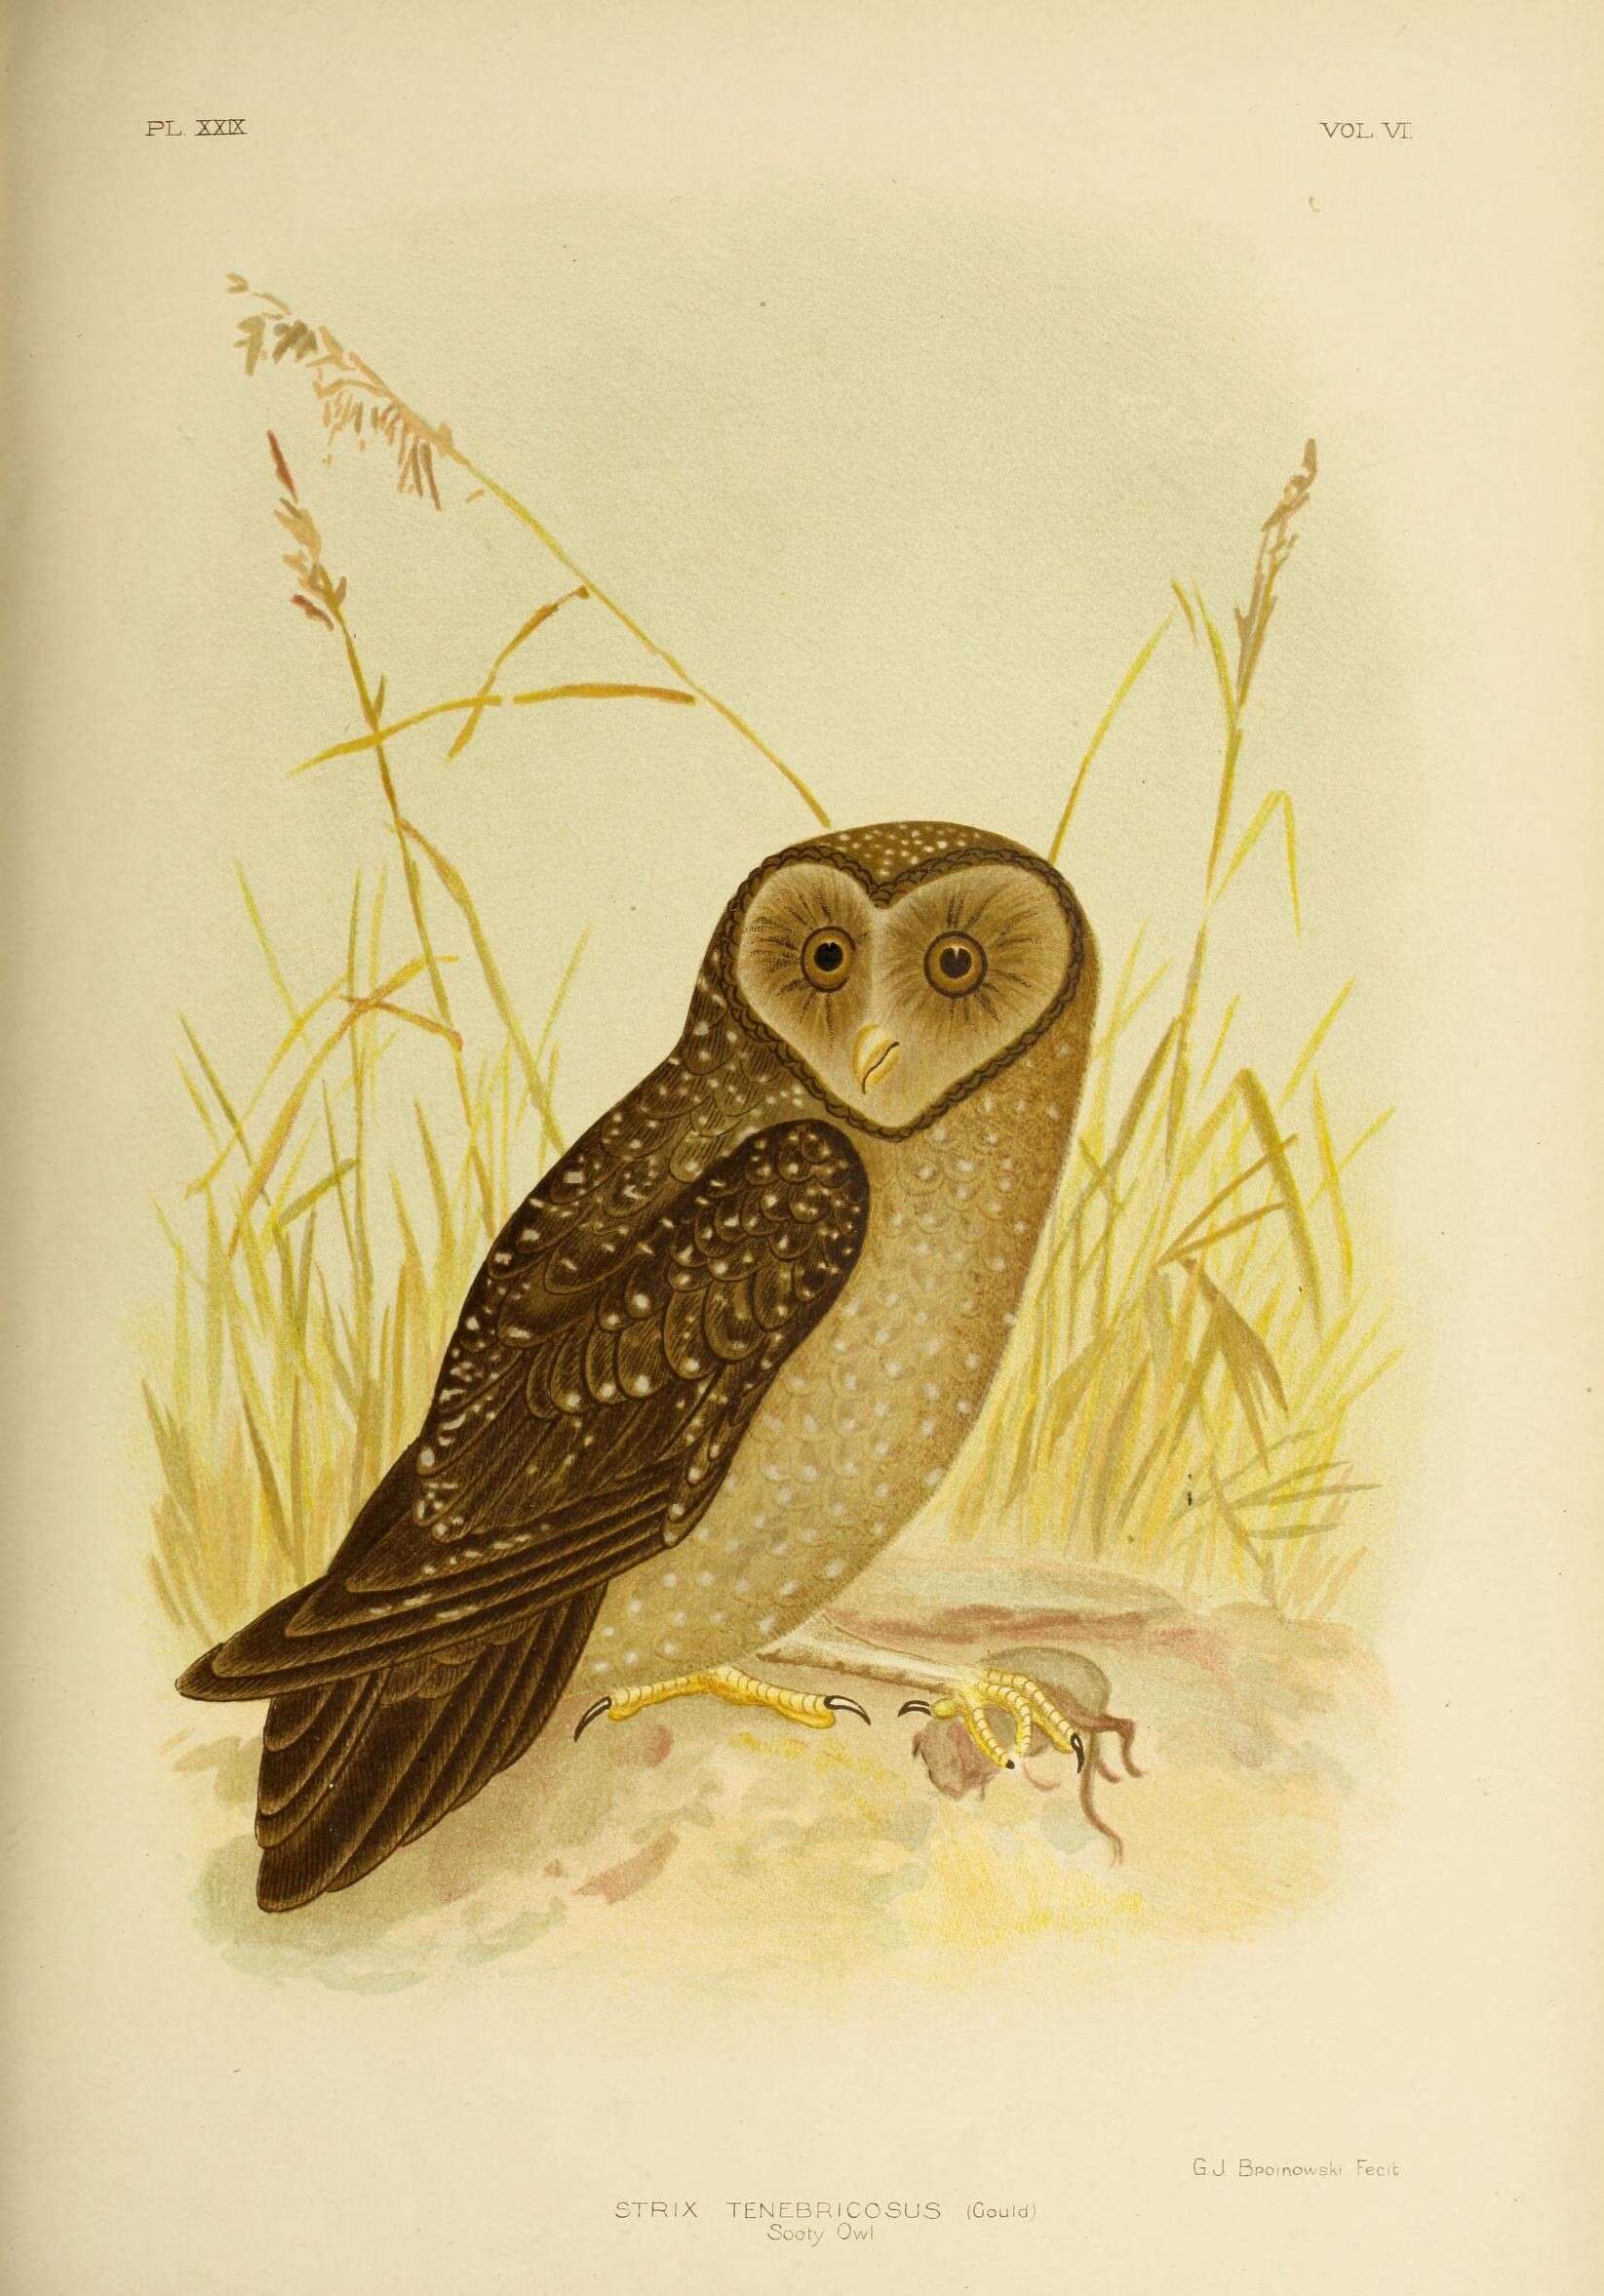 Image of Greater Sooty Owl